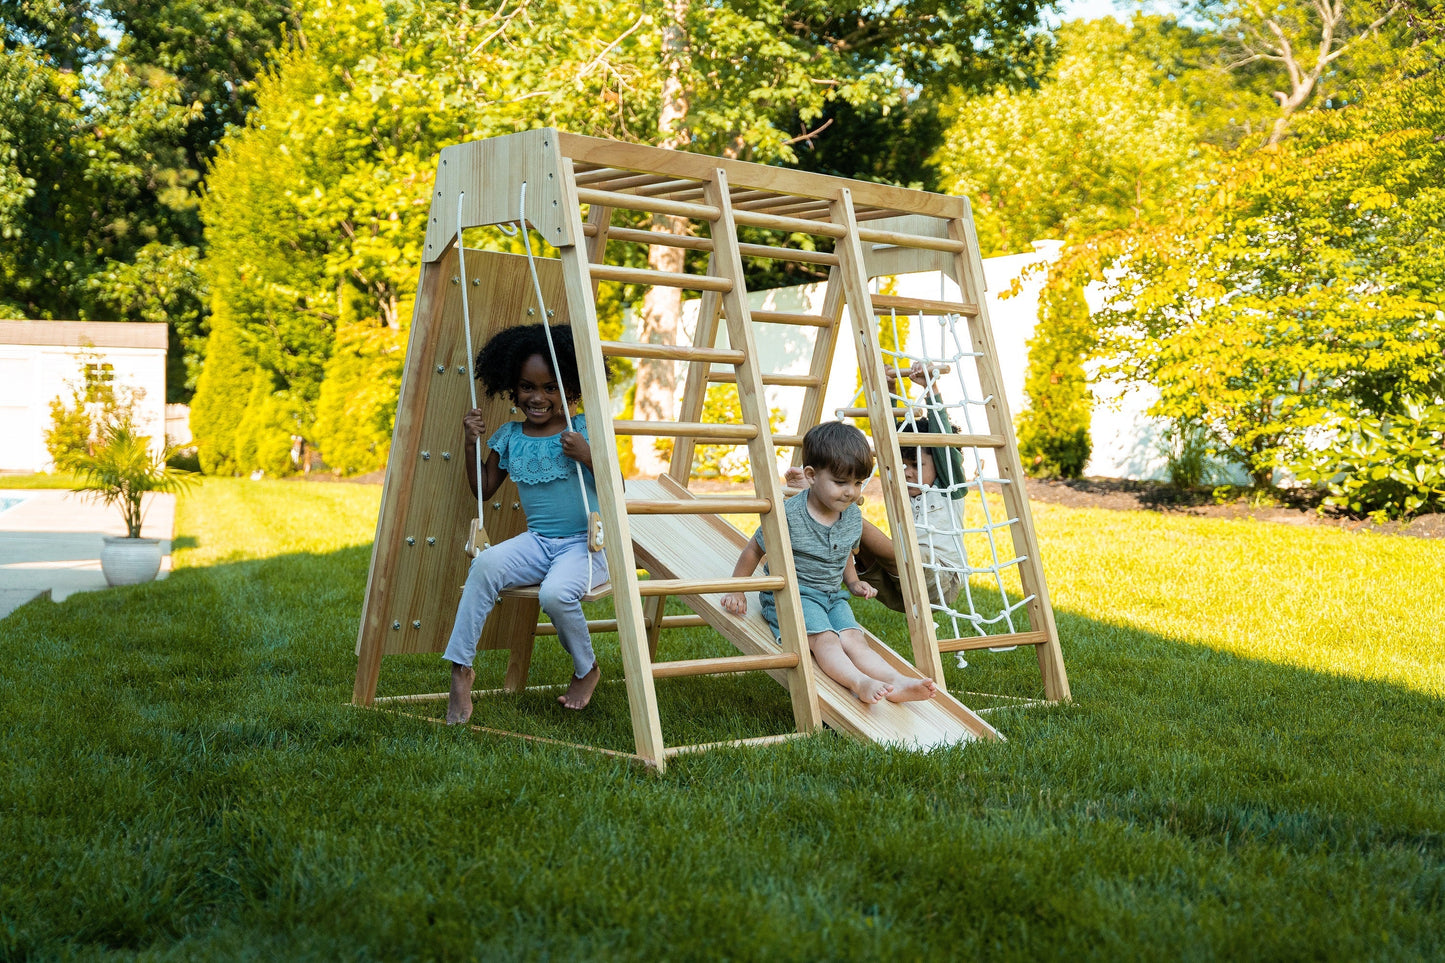 Magnolia - Real Wood 7-in-1 Playset by Avenlur